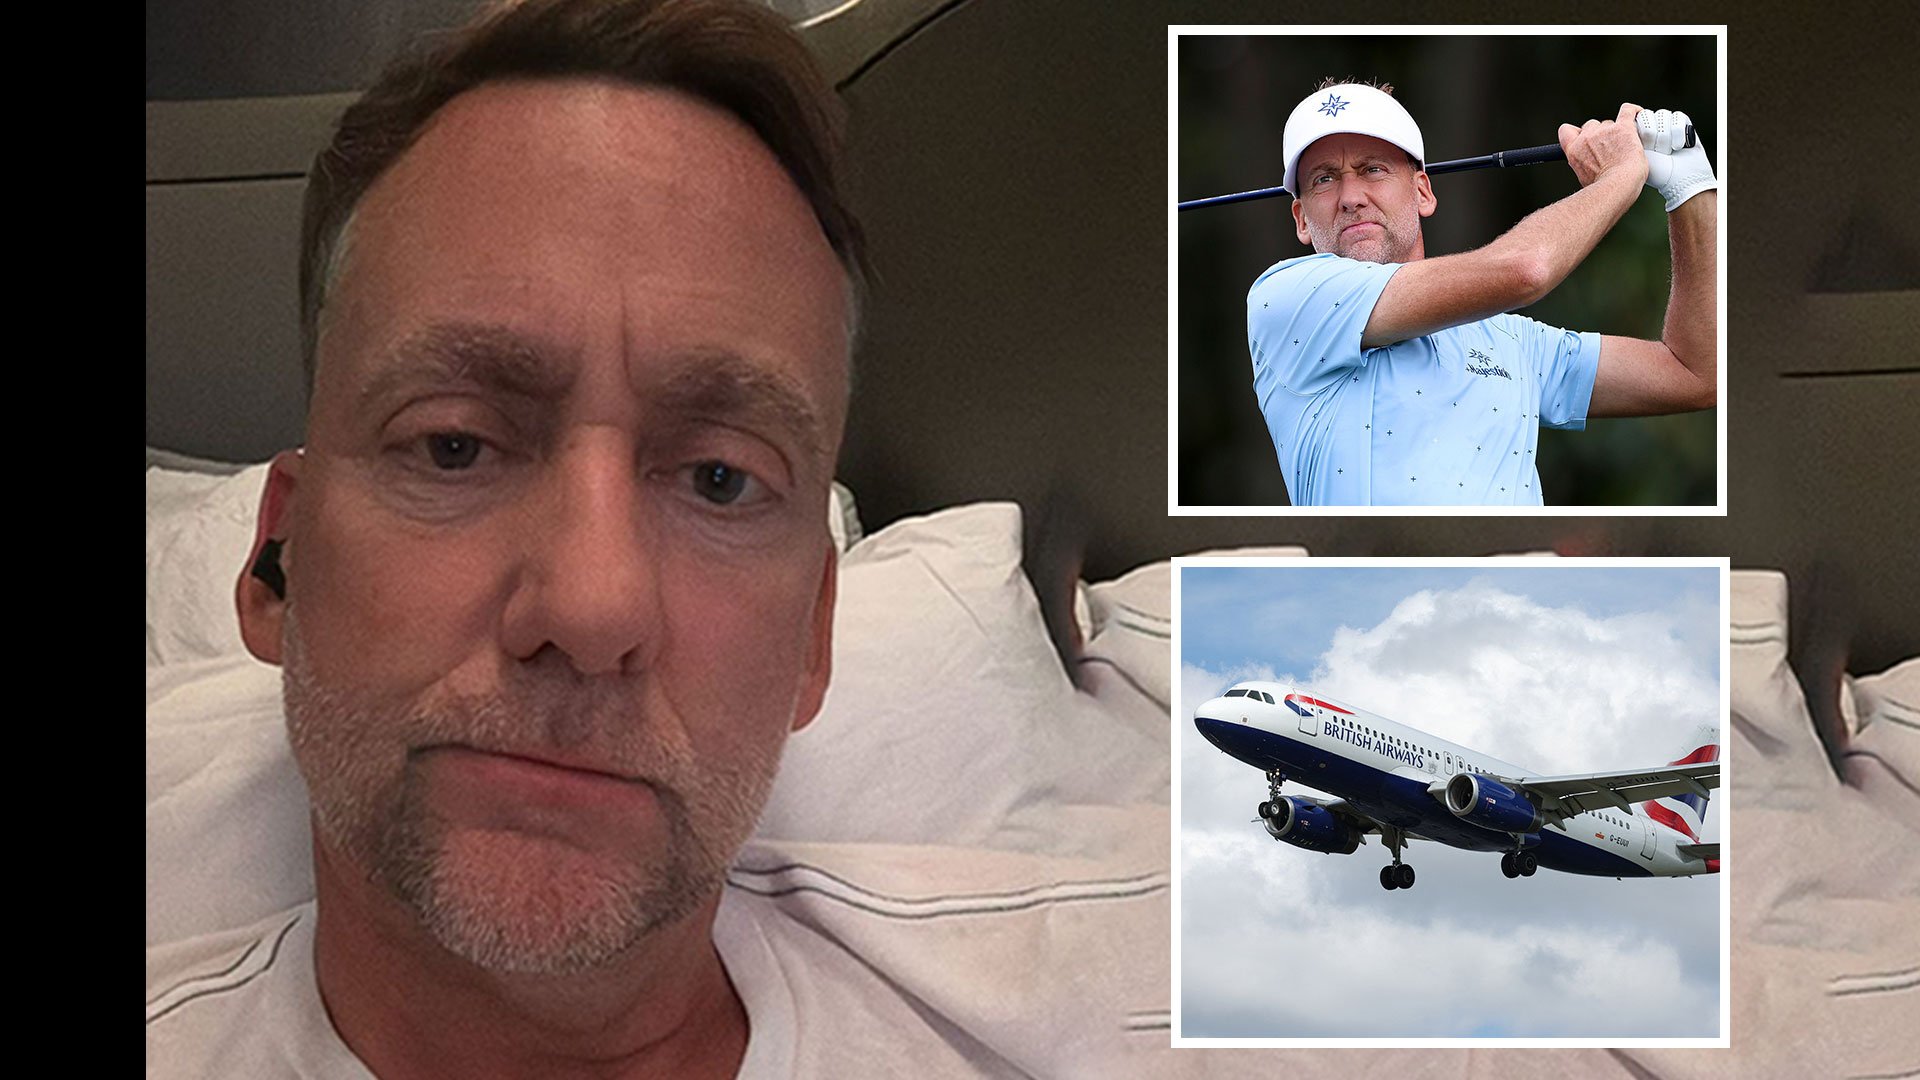 Furious Ian Poulter in huge rant at British Airways for leaving his clubs at Heathrow then lets rip at snoring passenger